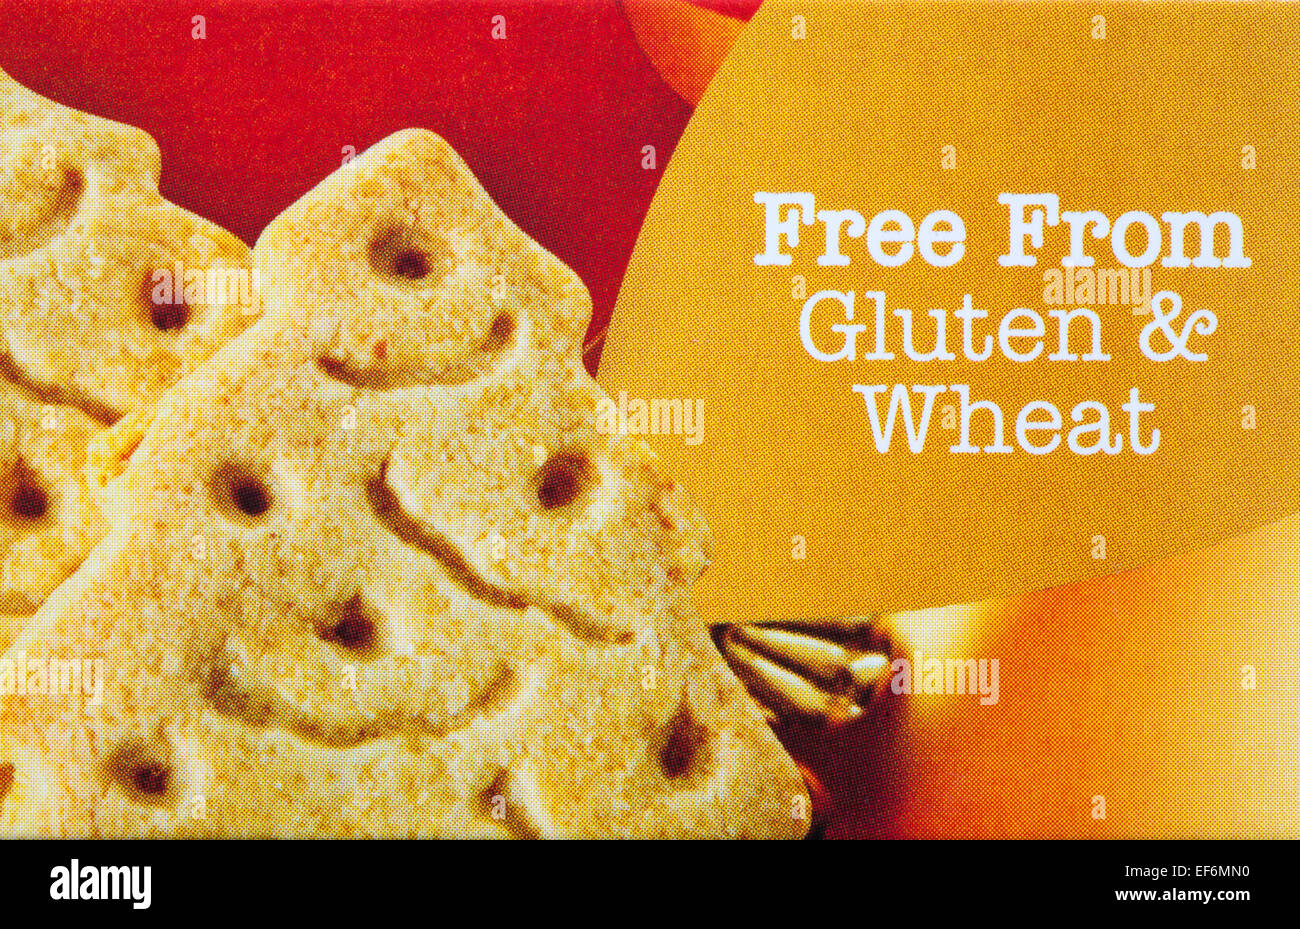 Free from gluten & wheat - detail on box of Prewett's Shortbread Christmas trees biscuits Stock Photo